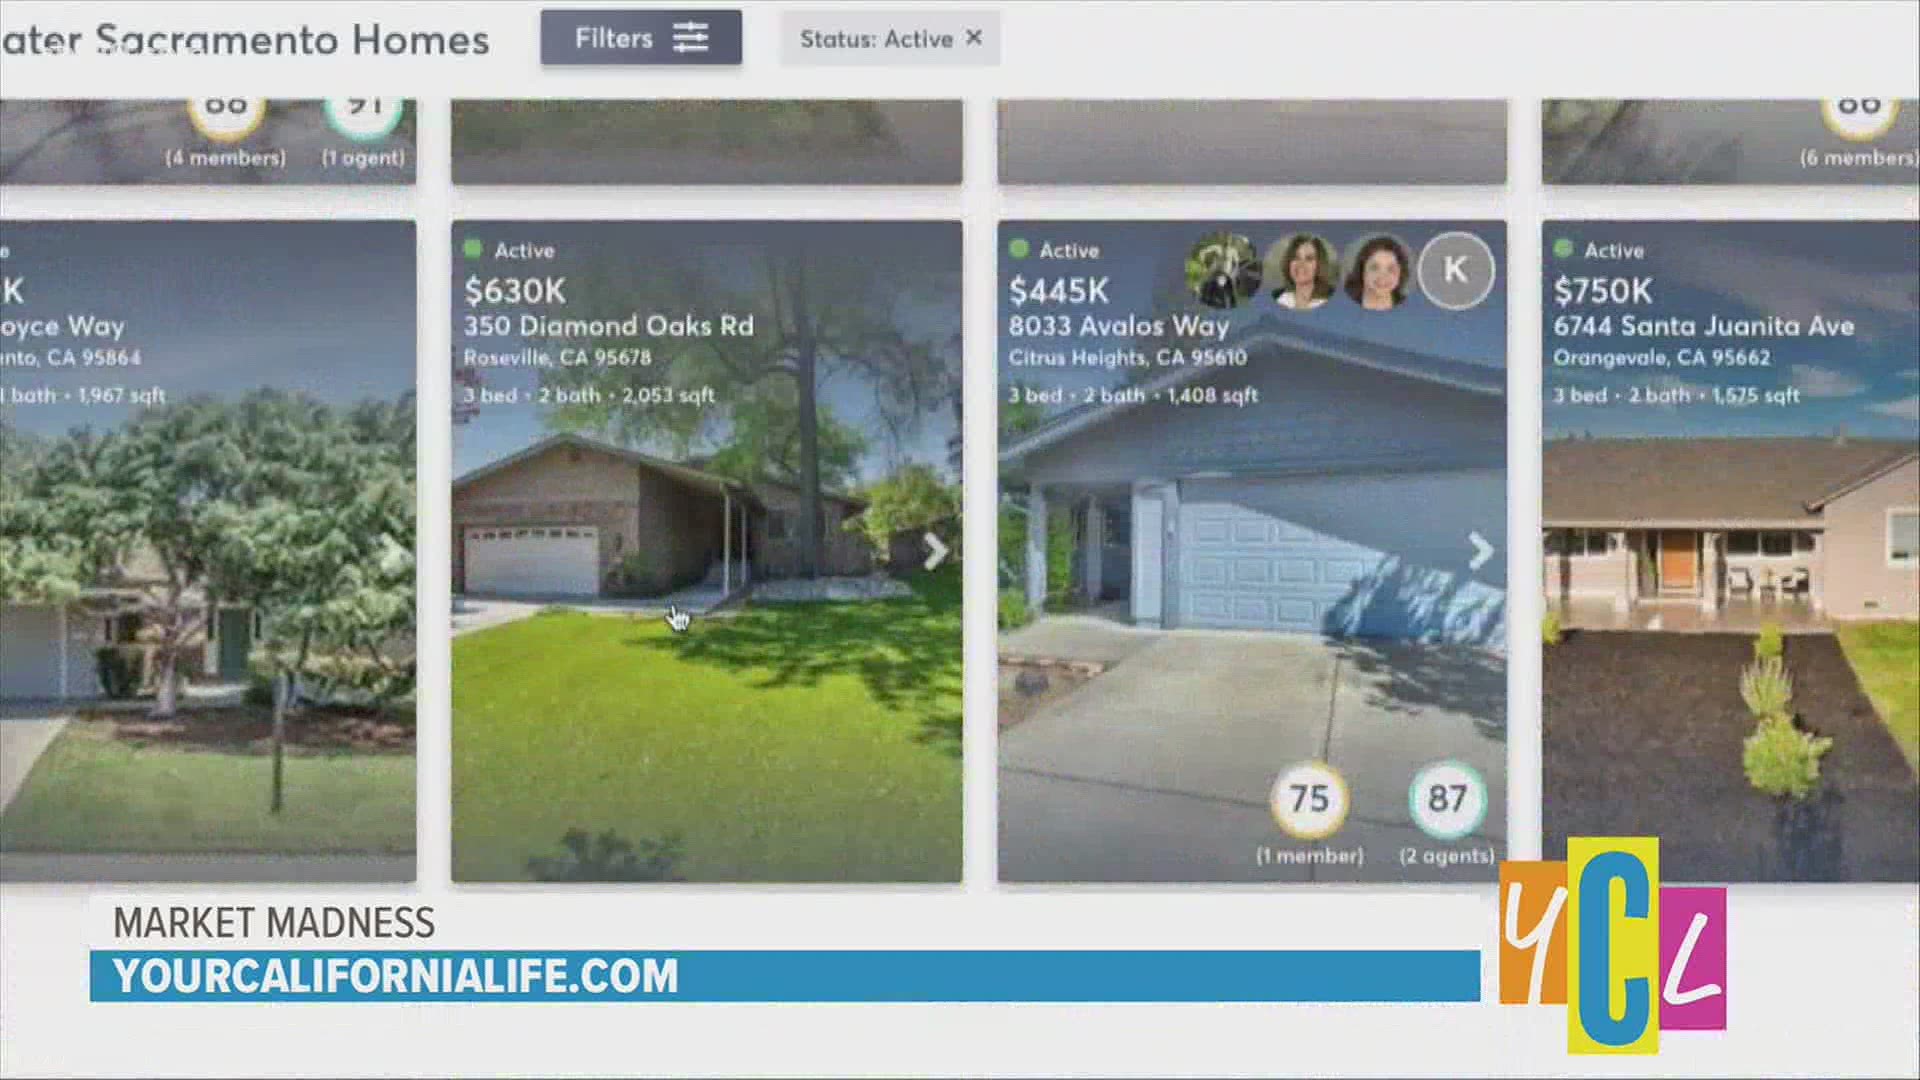 The first social network for real estate is offering cash prizes for people who write up original reviews on homes for sale in the hot Sacramento housing market.